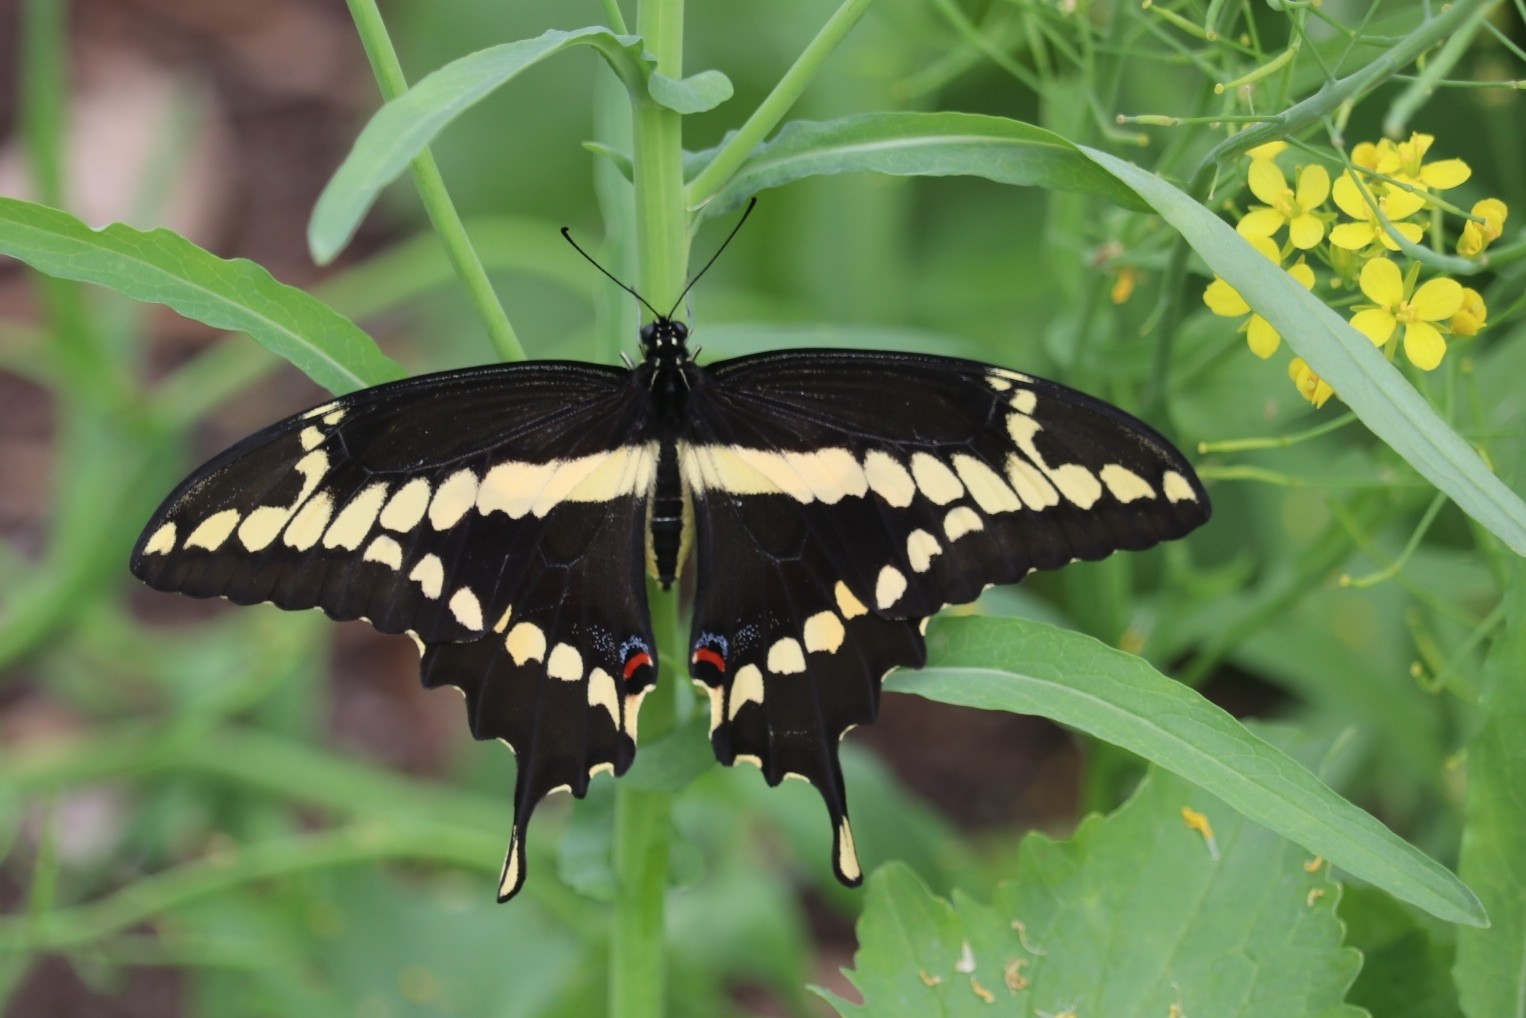 A Giant Swallowtail butterfly resting on a stem of broccoli rabe. Dorsal view with the wings spread wide.</p><p>Further detail: the butterfly is black with a horizontal yellow band stretching across the forewings and additional yellow markings down the sides of the hindwings. There are two small red and blue patches on the interior hindwings. Background is a tangle of long, tapered green leaves and a small cluster of yellow broccoli rabe flowers.